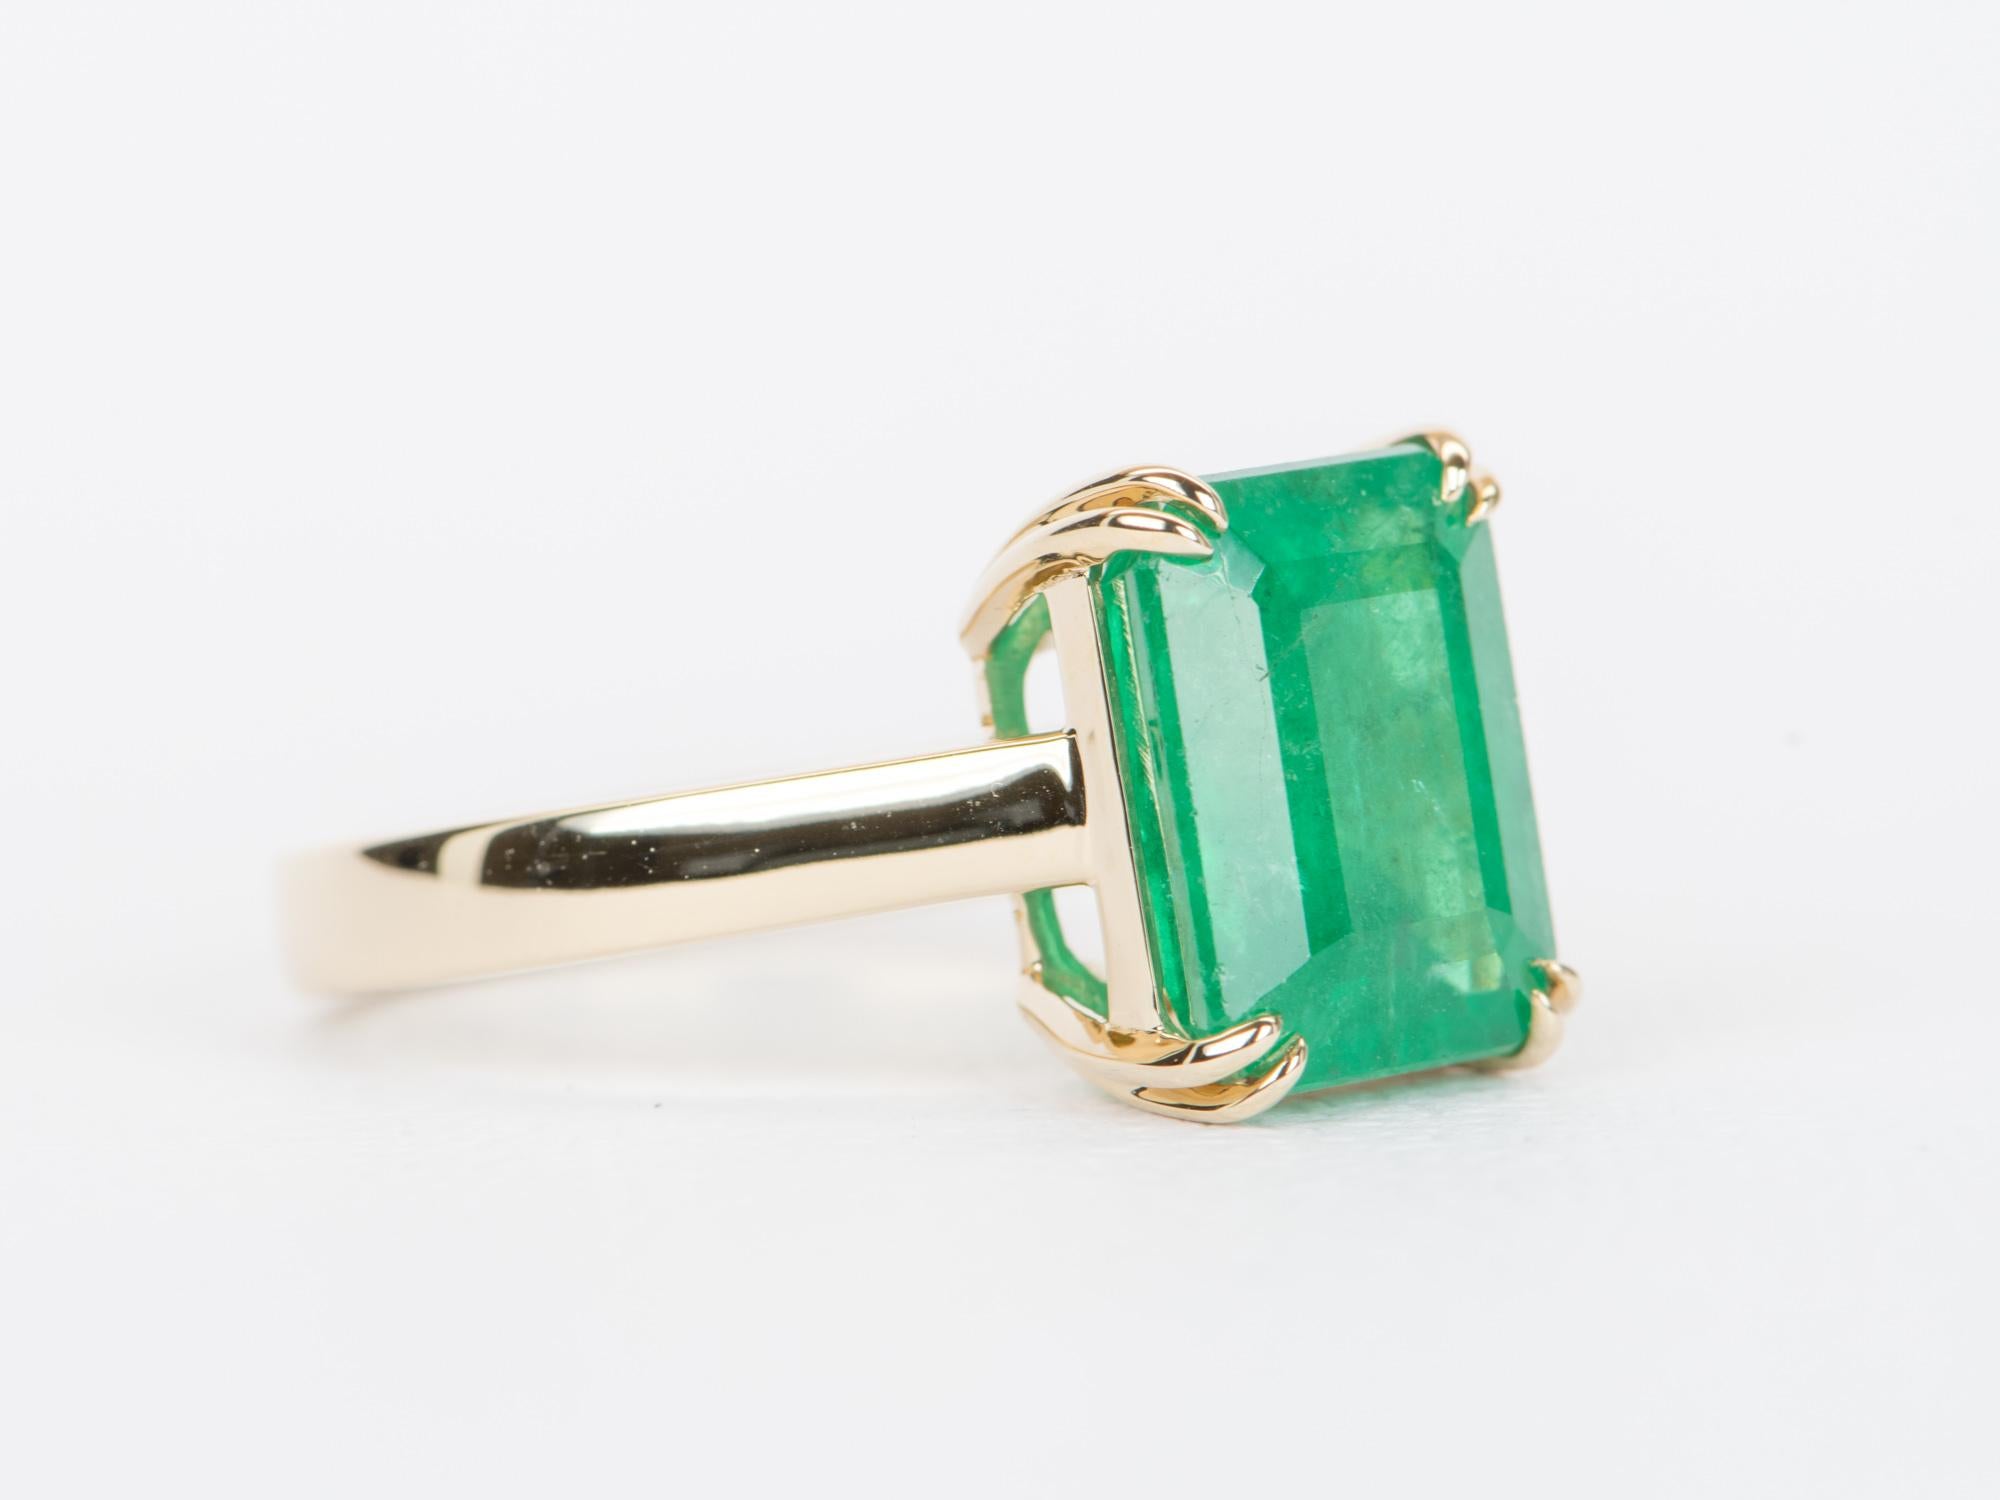 Emerald Cut 5.33ct Emerald Statement Ring 14K Yellow Gold R6348 For Sale